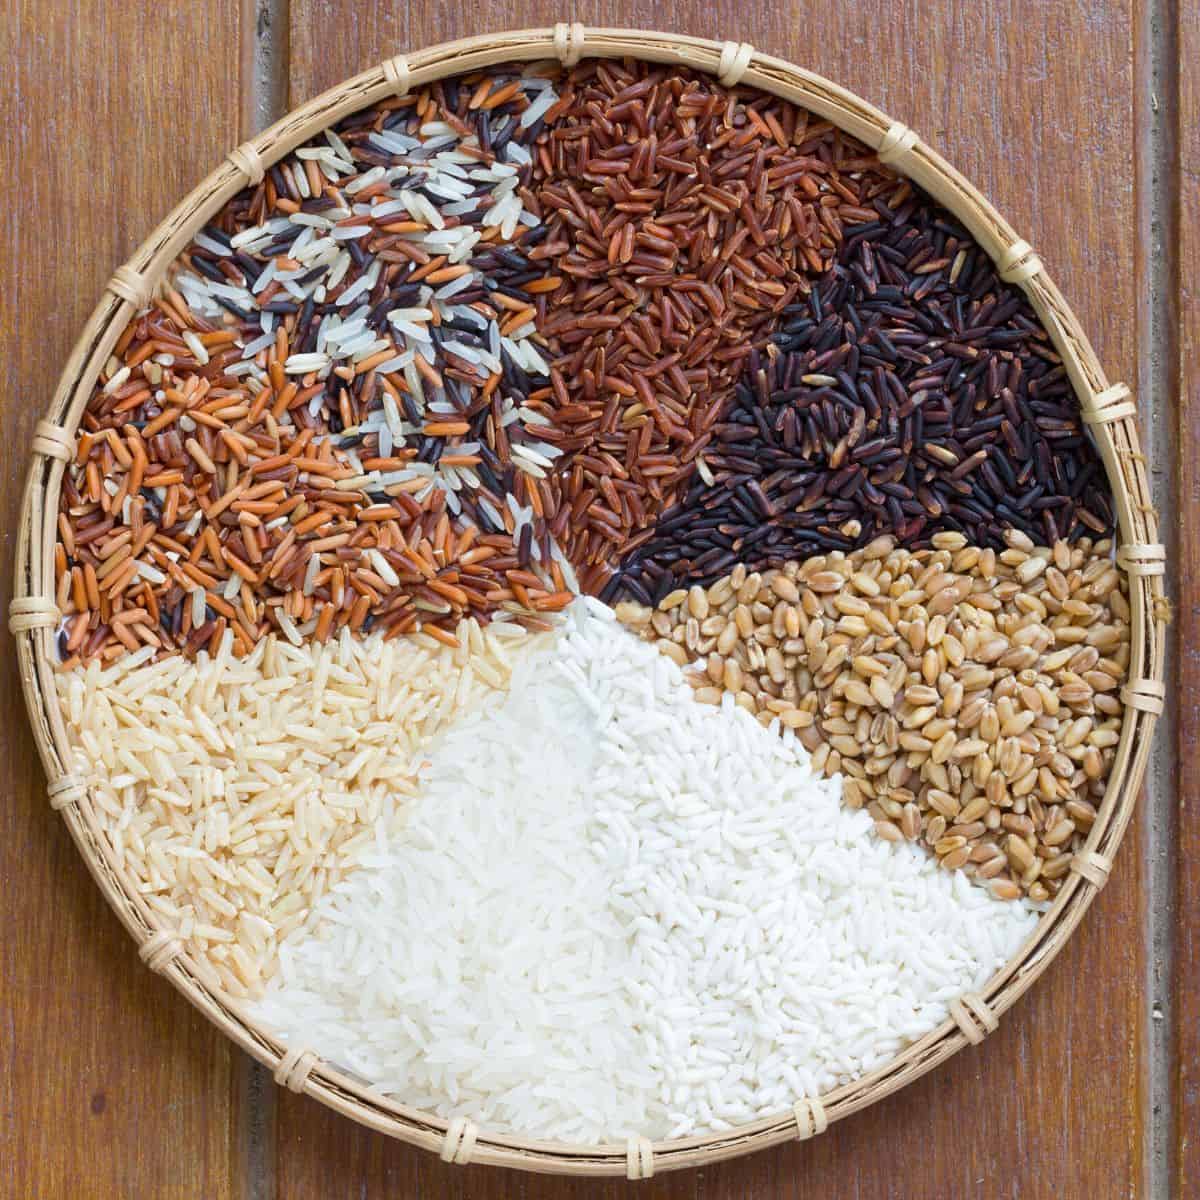 Circular basket filled with different varieties of rice. 